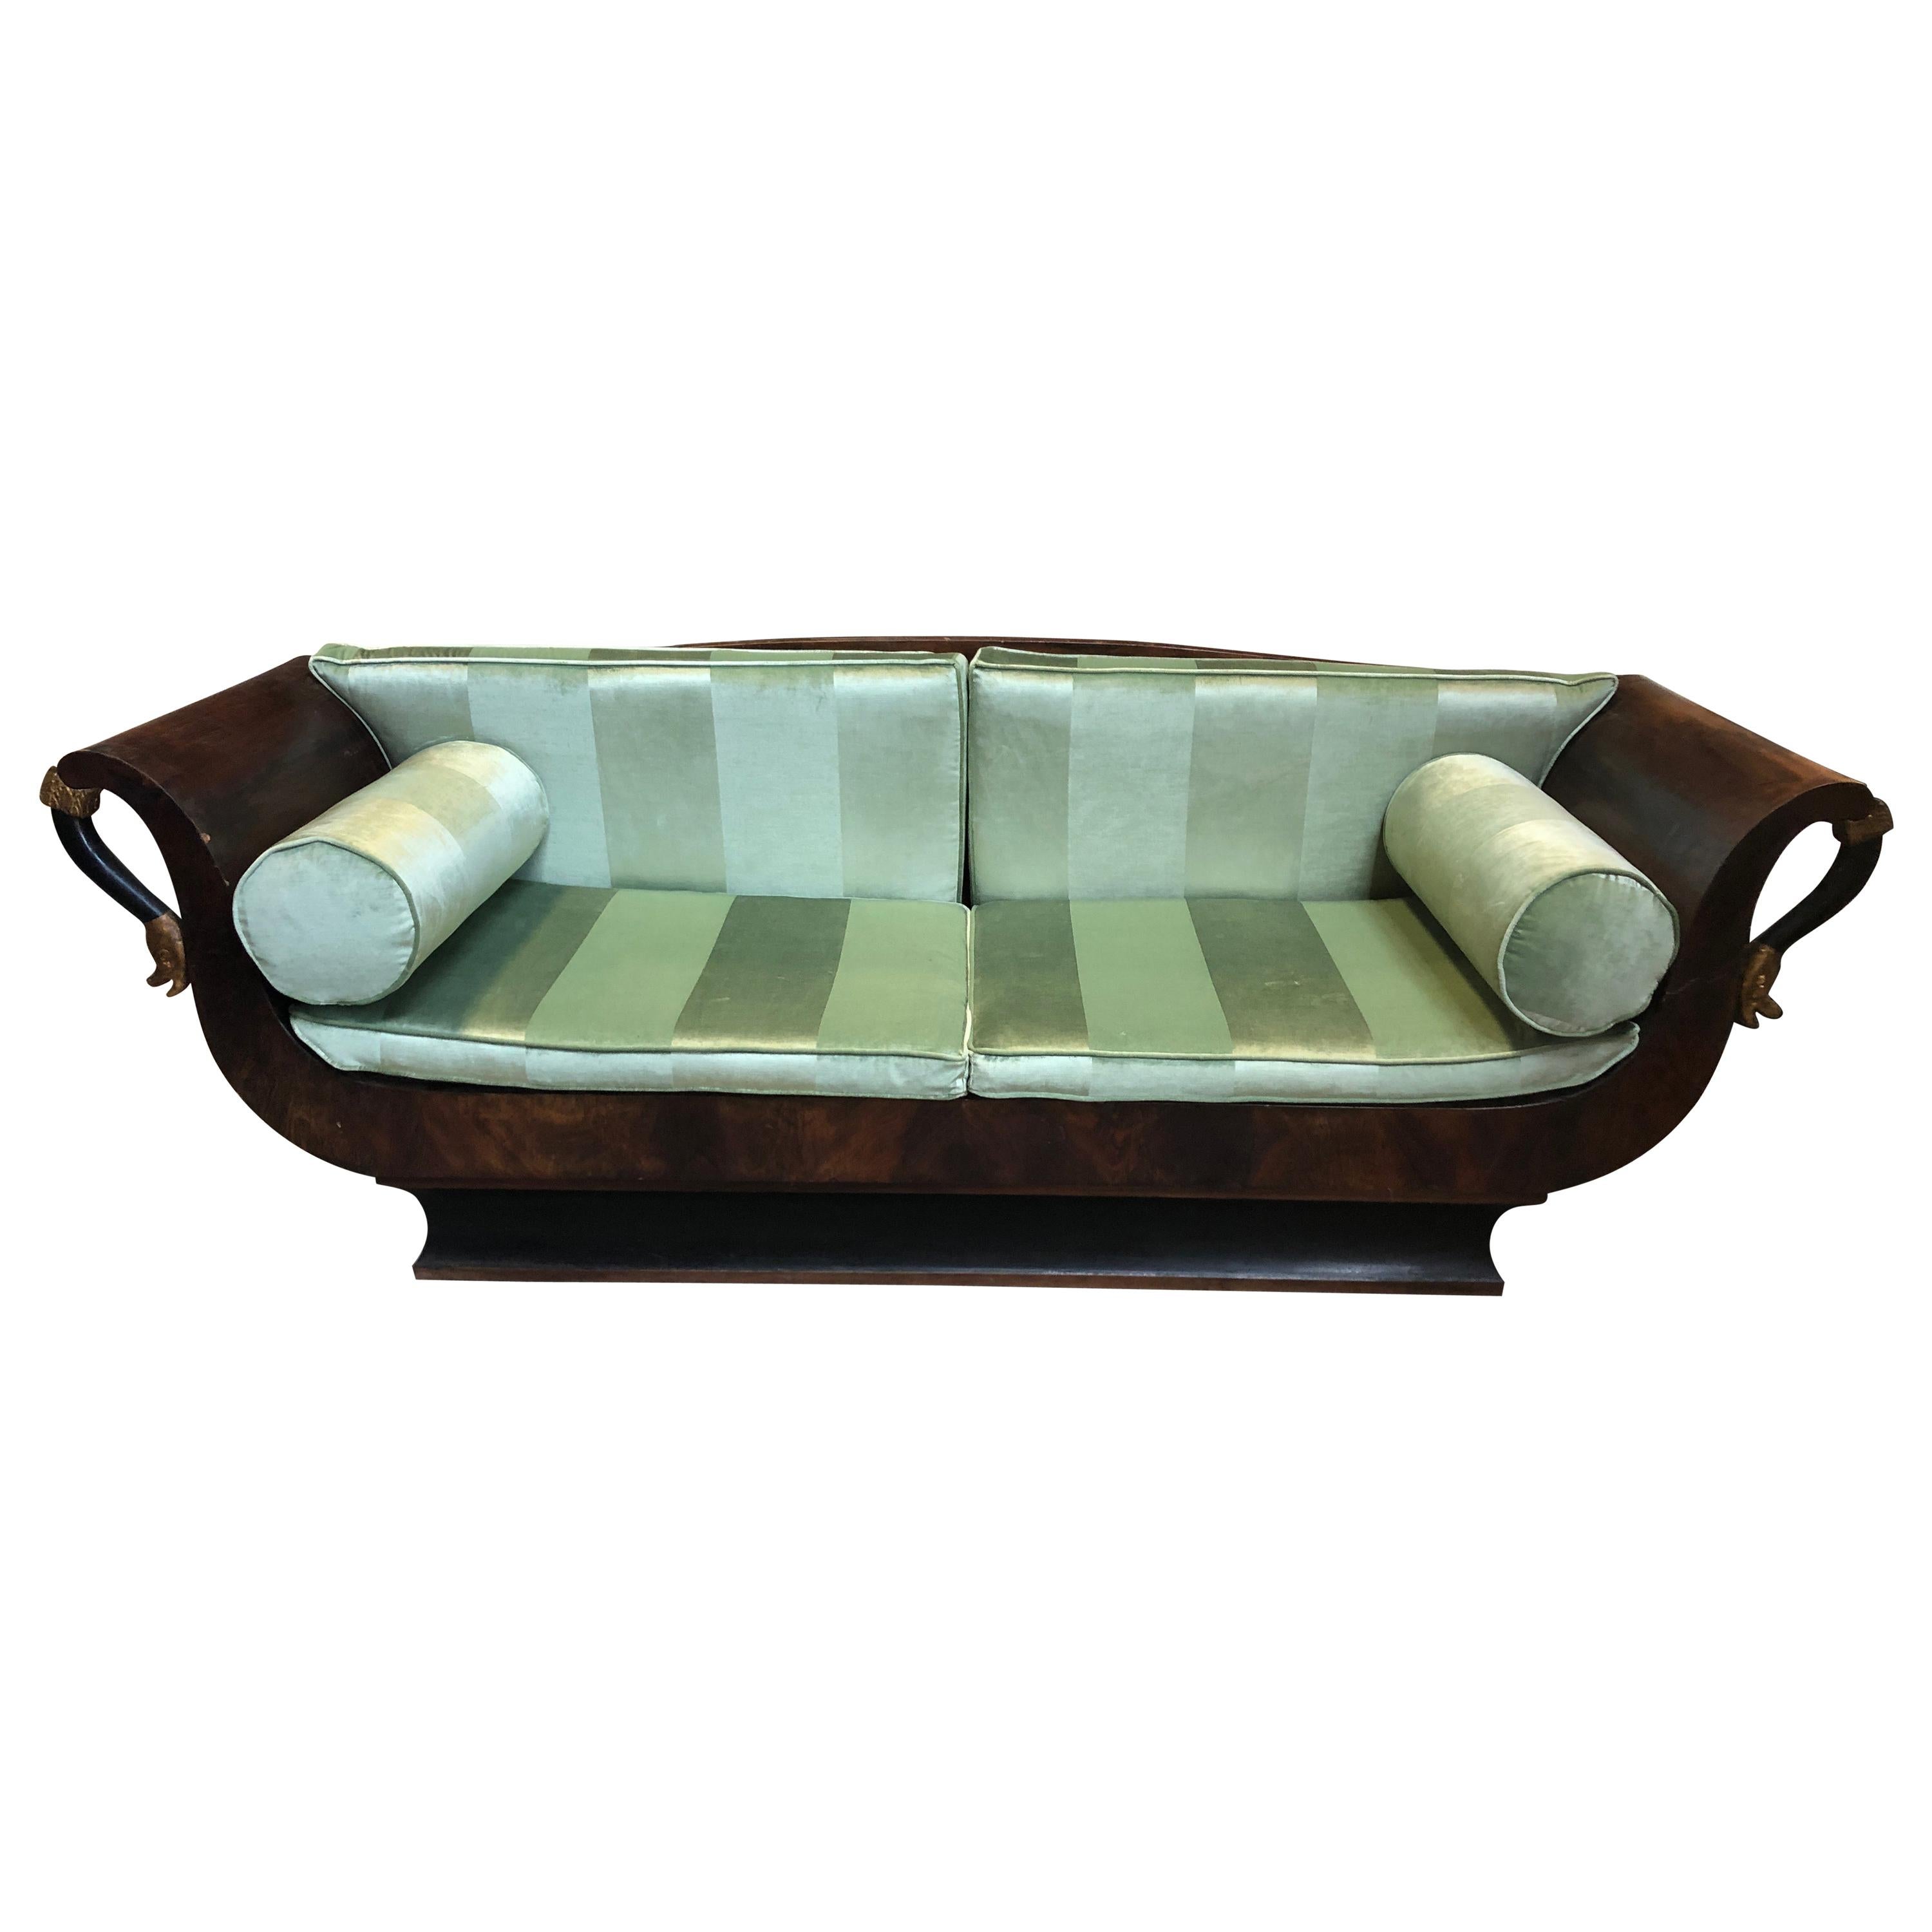 Sublime French Empire Walnut Curvy Sofa with Gilded Swans and Velvet Upholstery